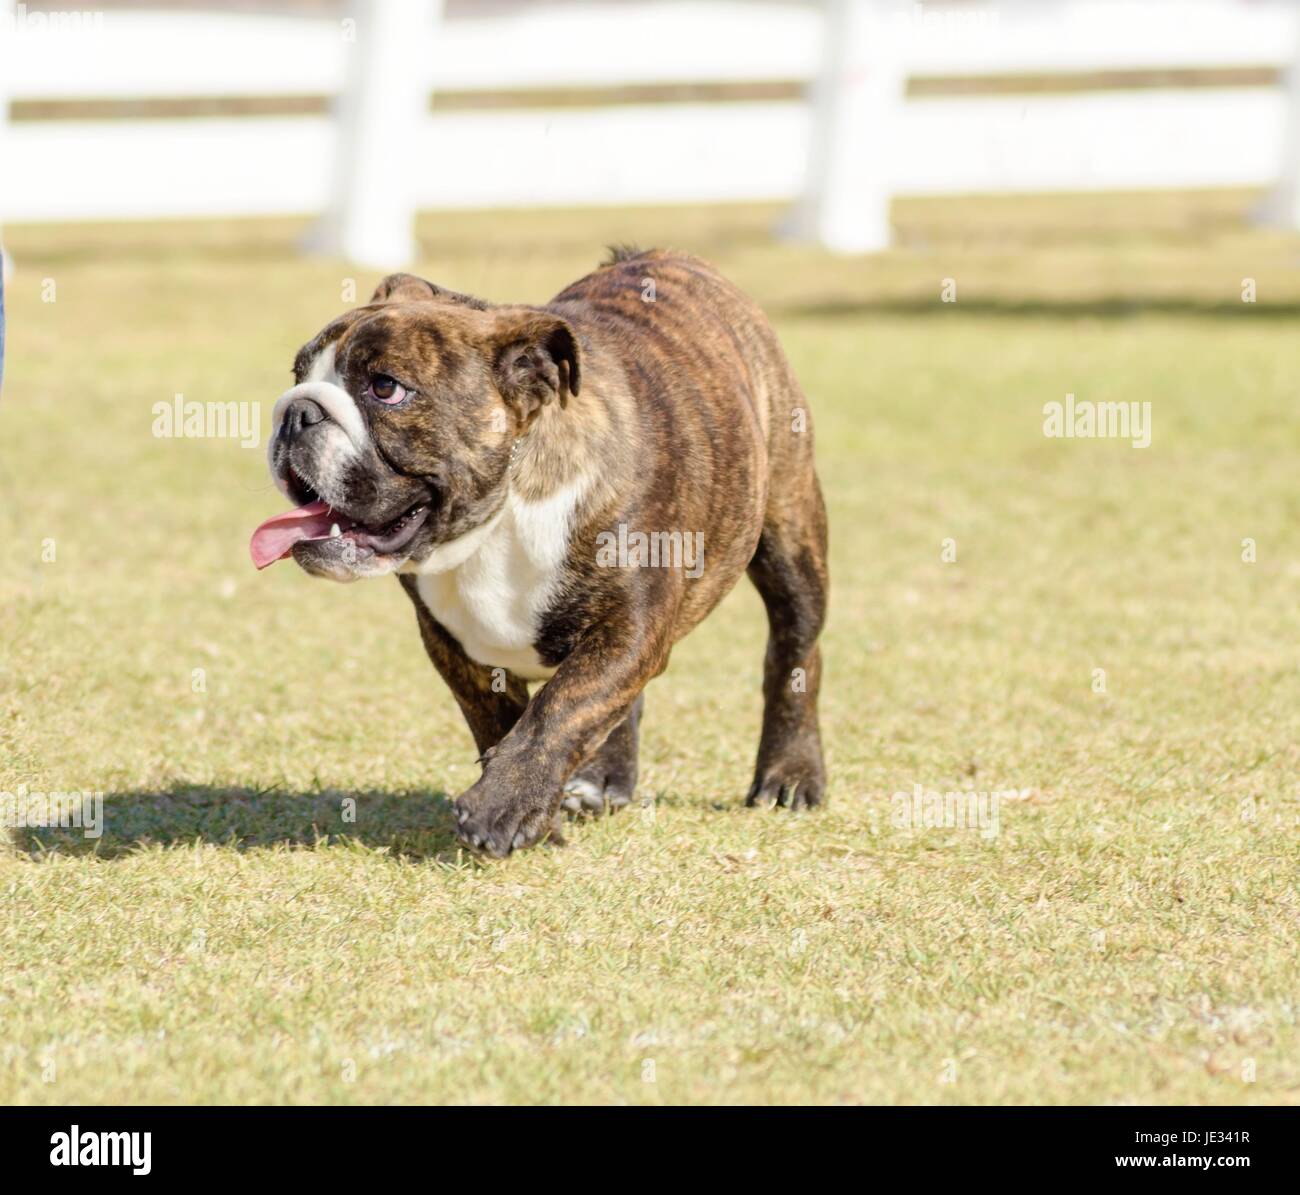 A small, young, beautiful, fawn brown brindle and white English Bulldog running on the lawn looking playful and cheerful. The Bulldog is a muscular, heavy dog with a wrinkled face and a distinctive pushed-in nose. Stock Photo